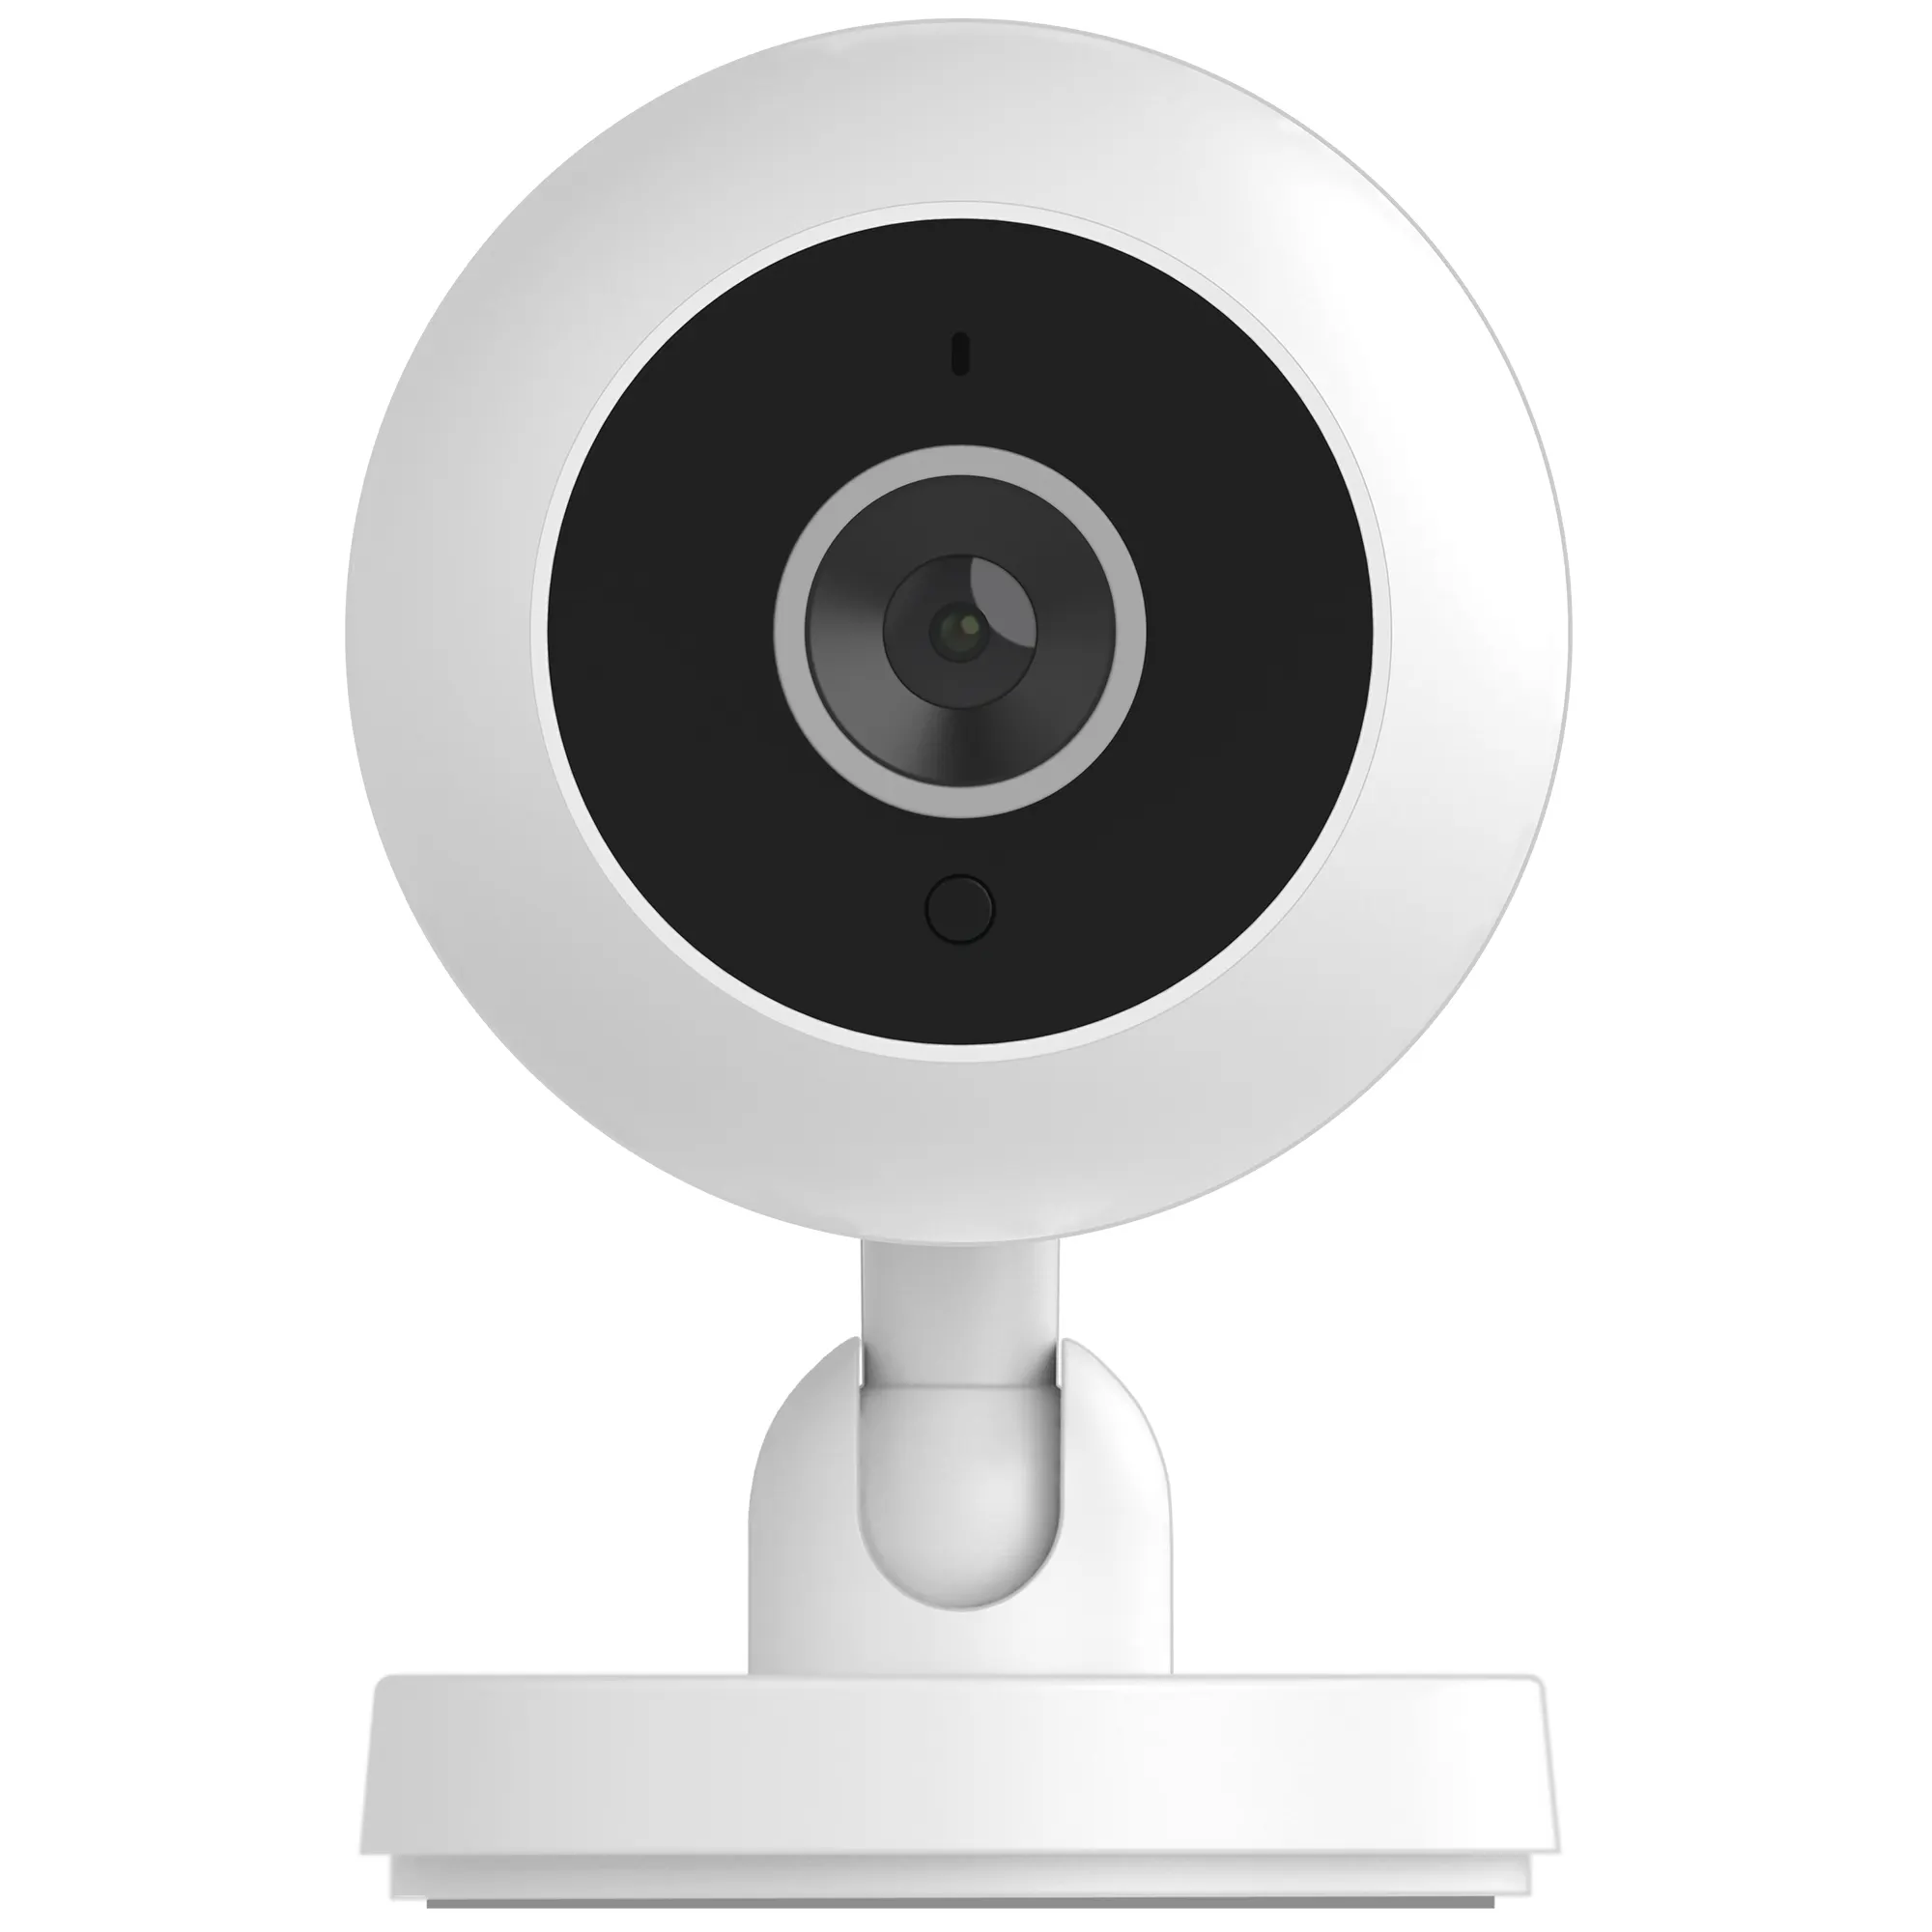 Video Record WIFI Network Camera 360 Degree Rotating Lens HD 640*480P IP Camera Built in Microphone Indoor Home Security Camera